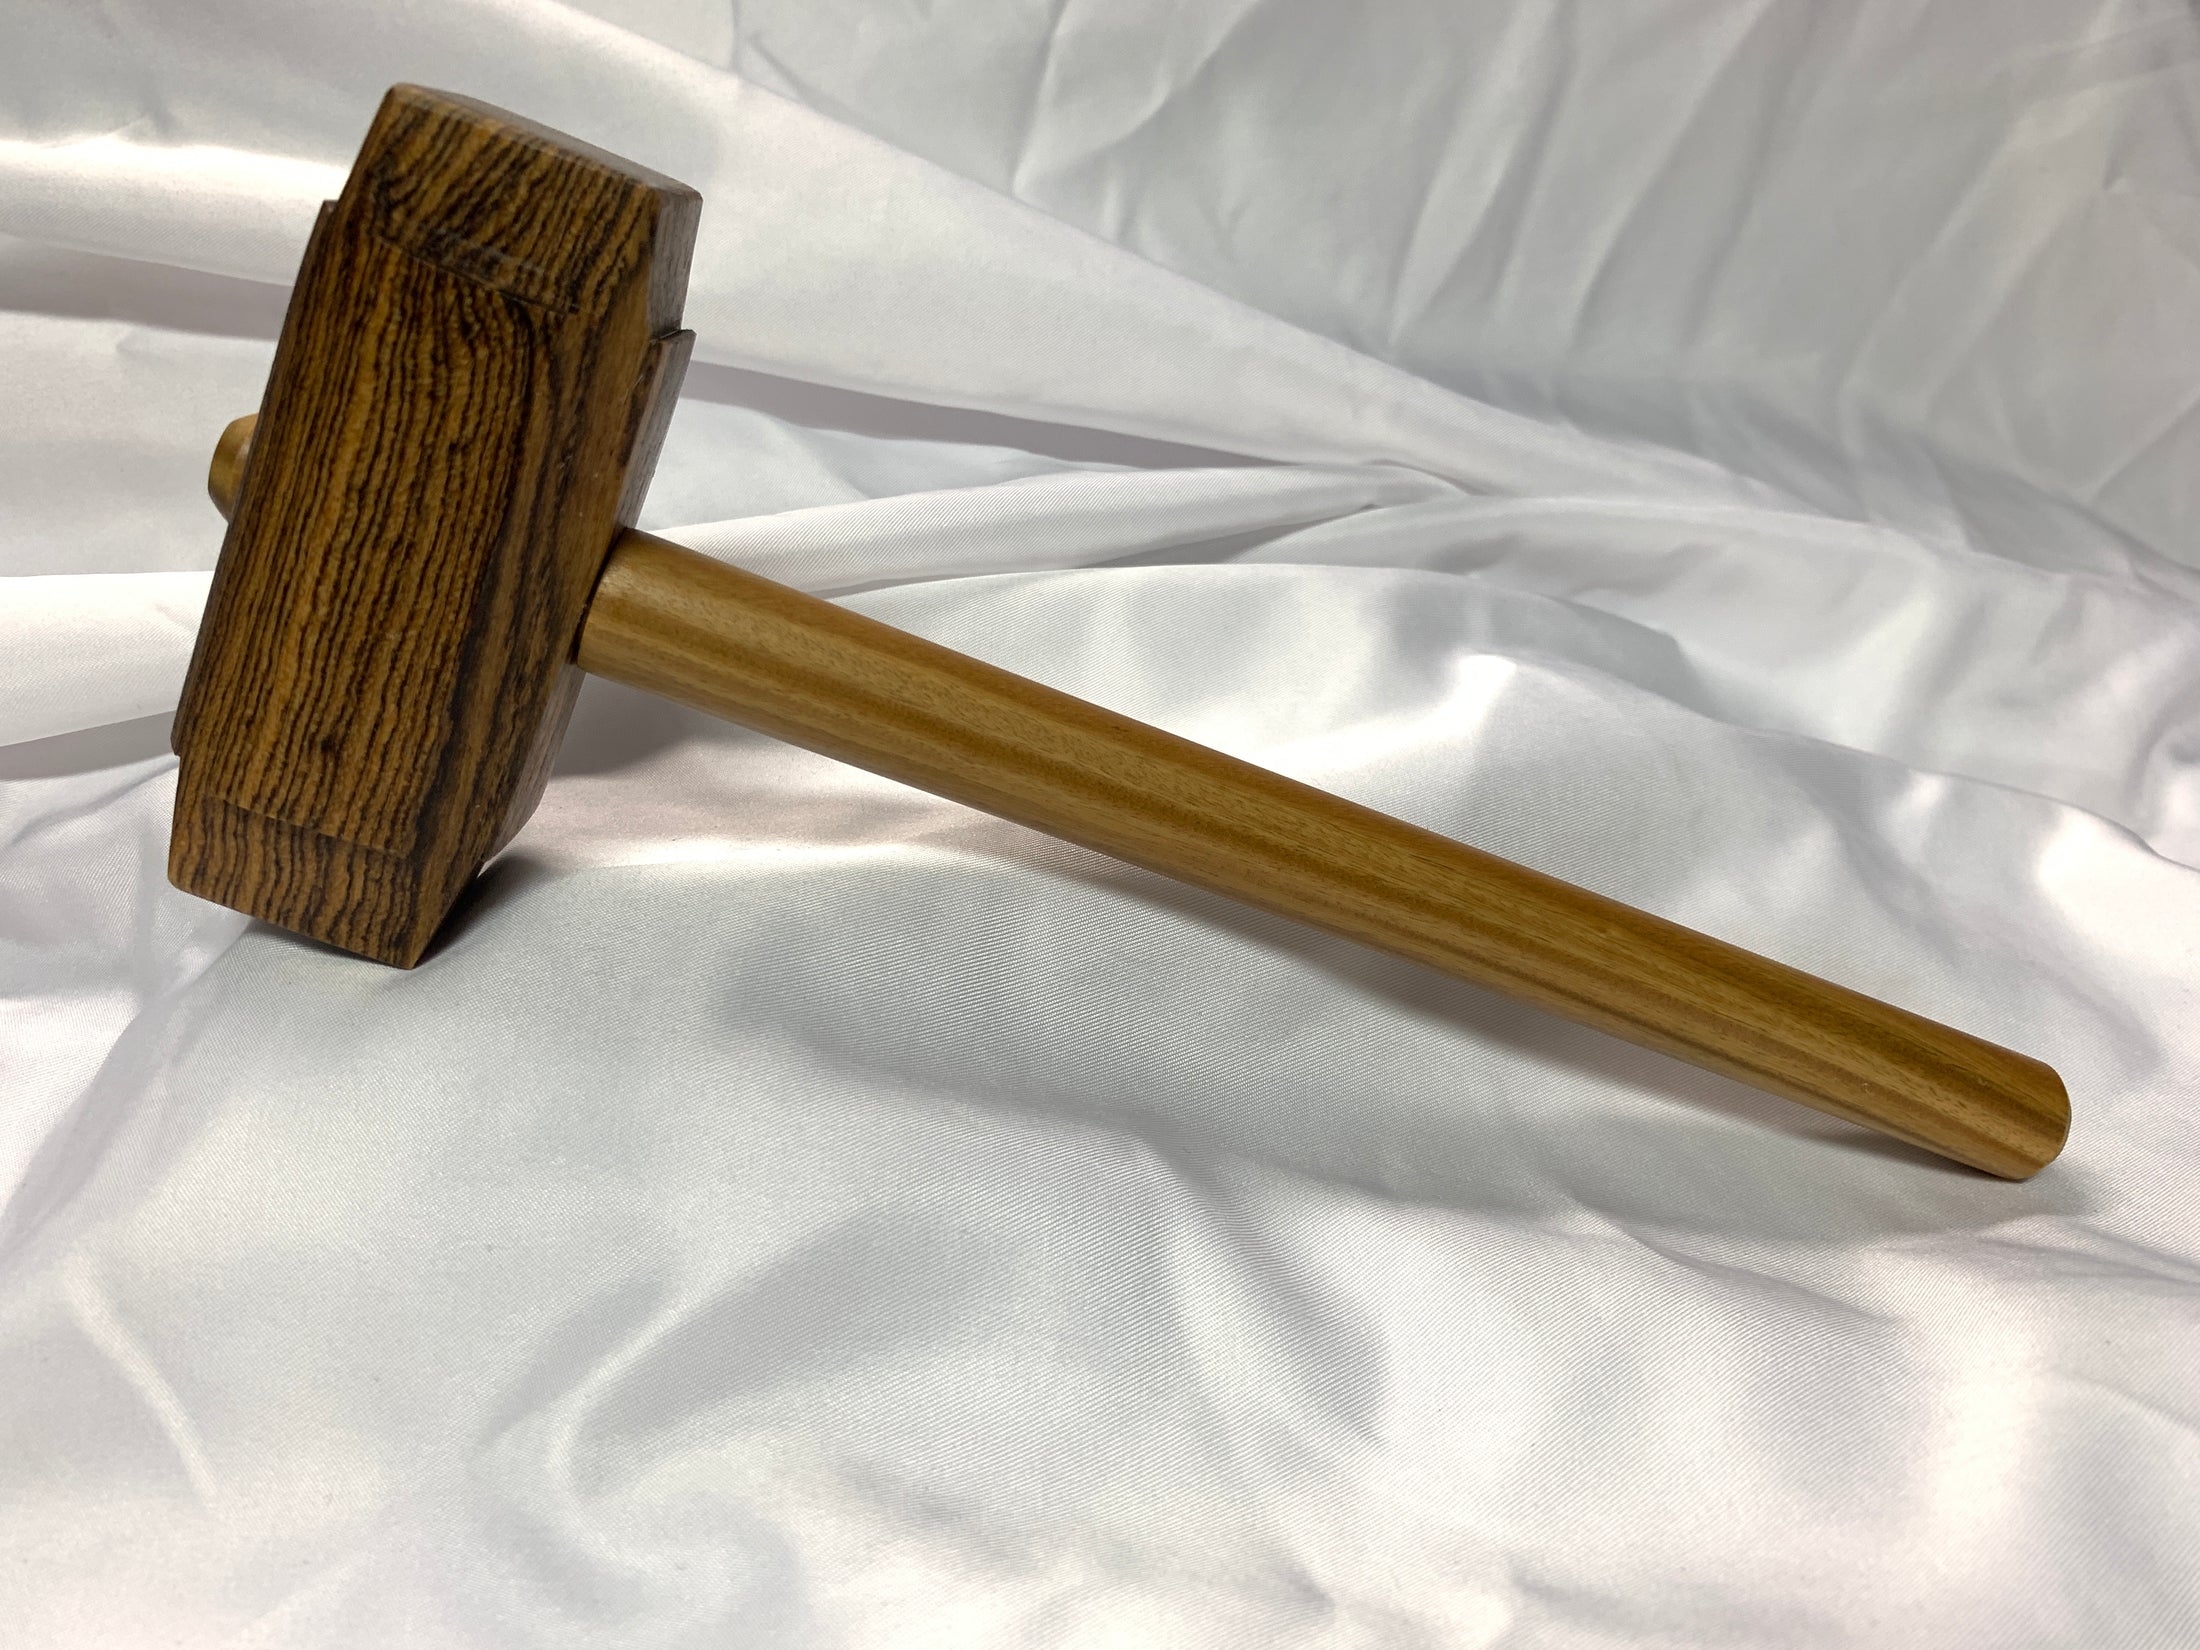 Thors Hammer Woodworking Mallet Bocote Head with Lignum Vitae Handle Kings Fine Woodworking